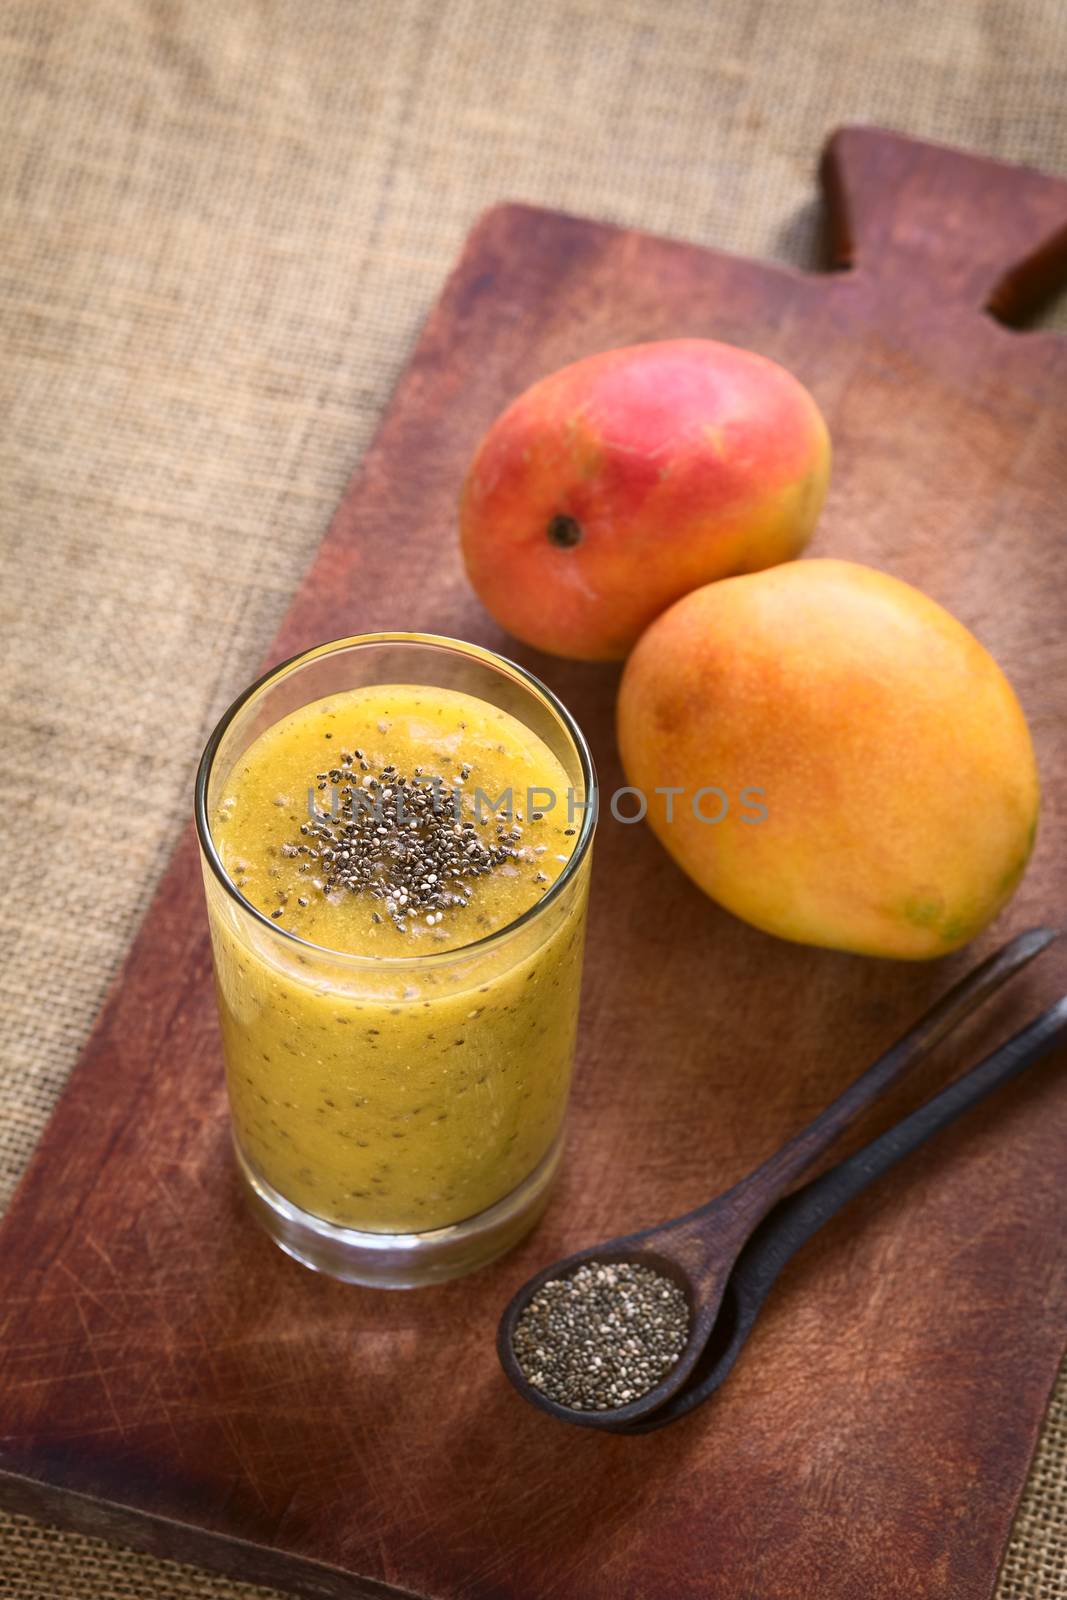 Chia seed (lat. Salvia hispanica) and mango juice photographed on wood with natural light. Chia seeds are considered a superfood containing proteins, omega fats, minerals and antioxidants (Selective Focus, Focus on the chia seeds on the juice)